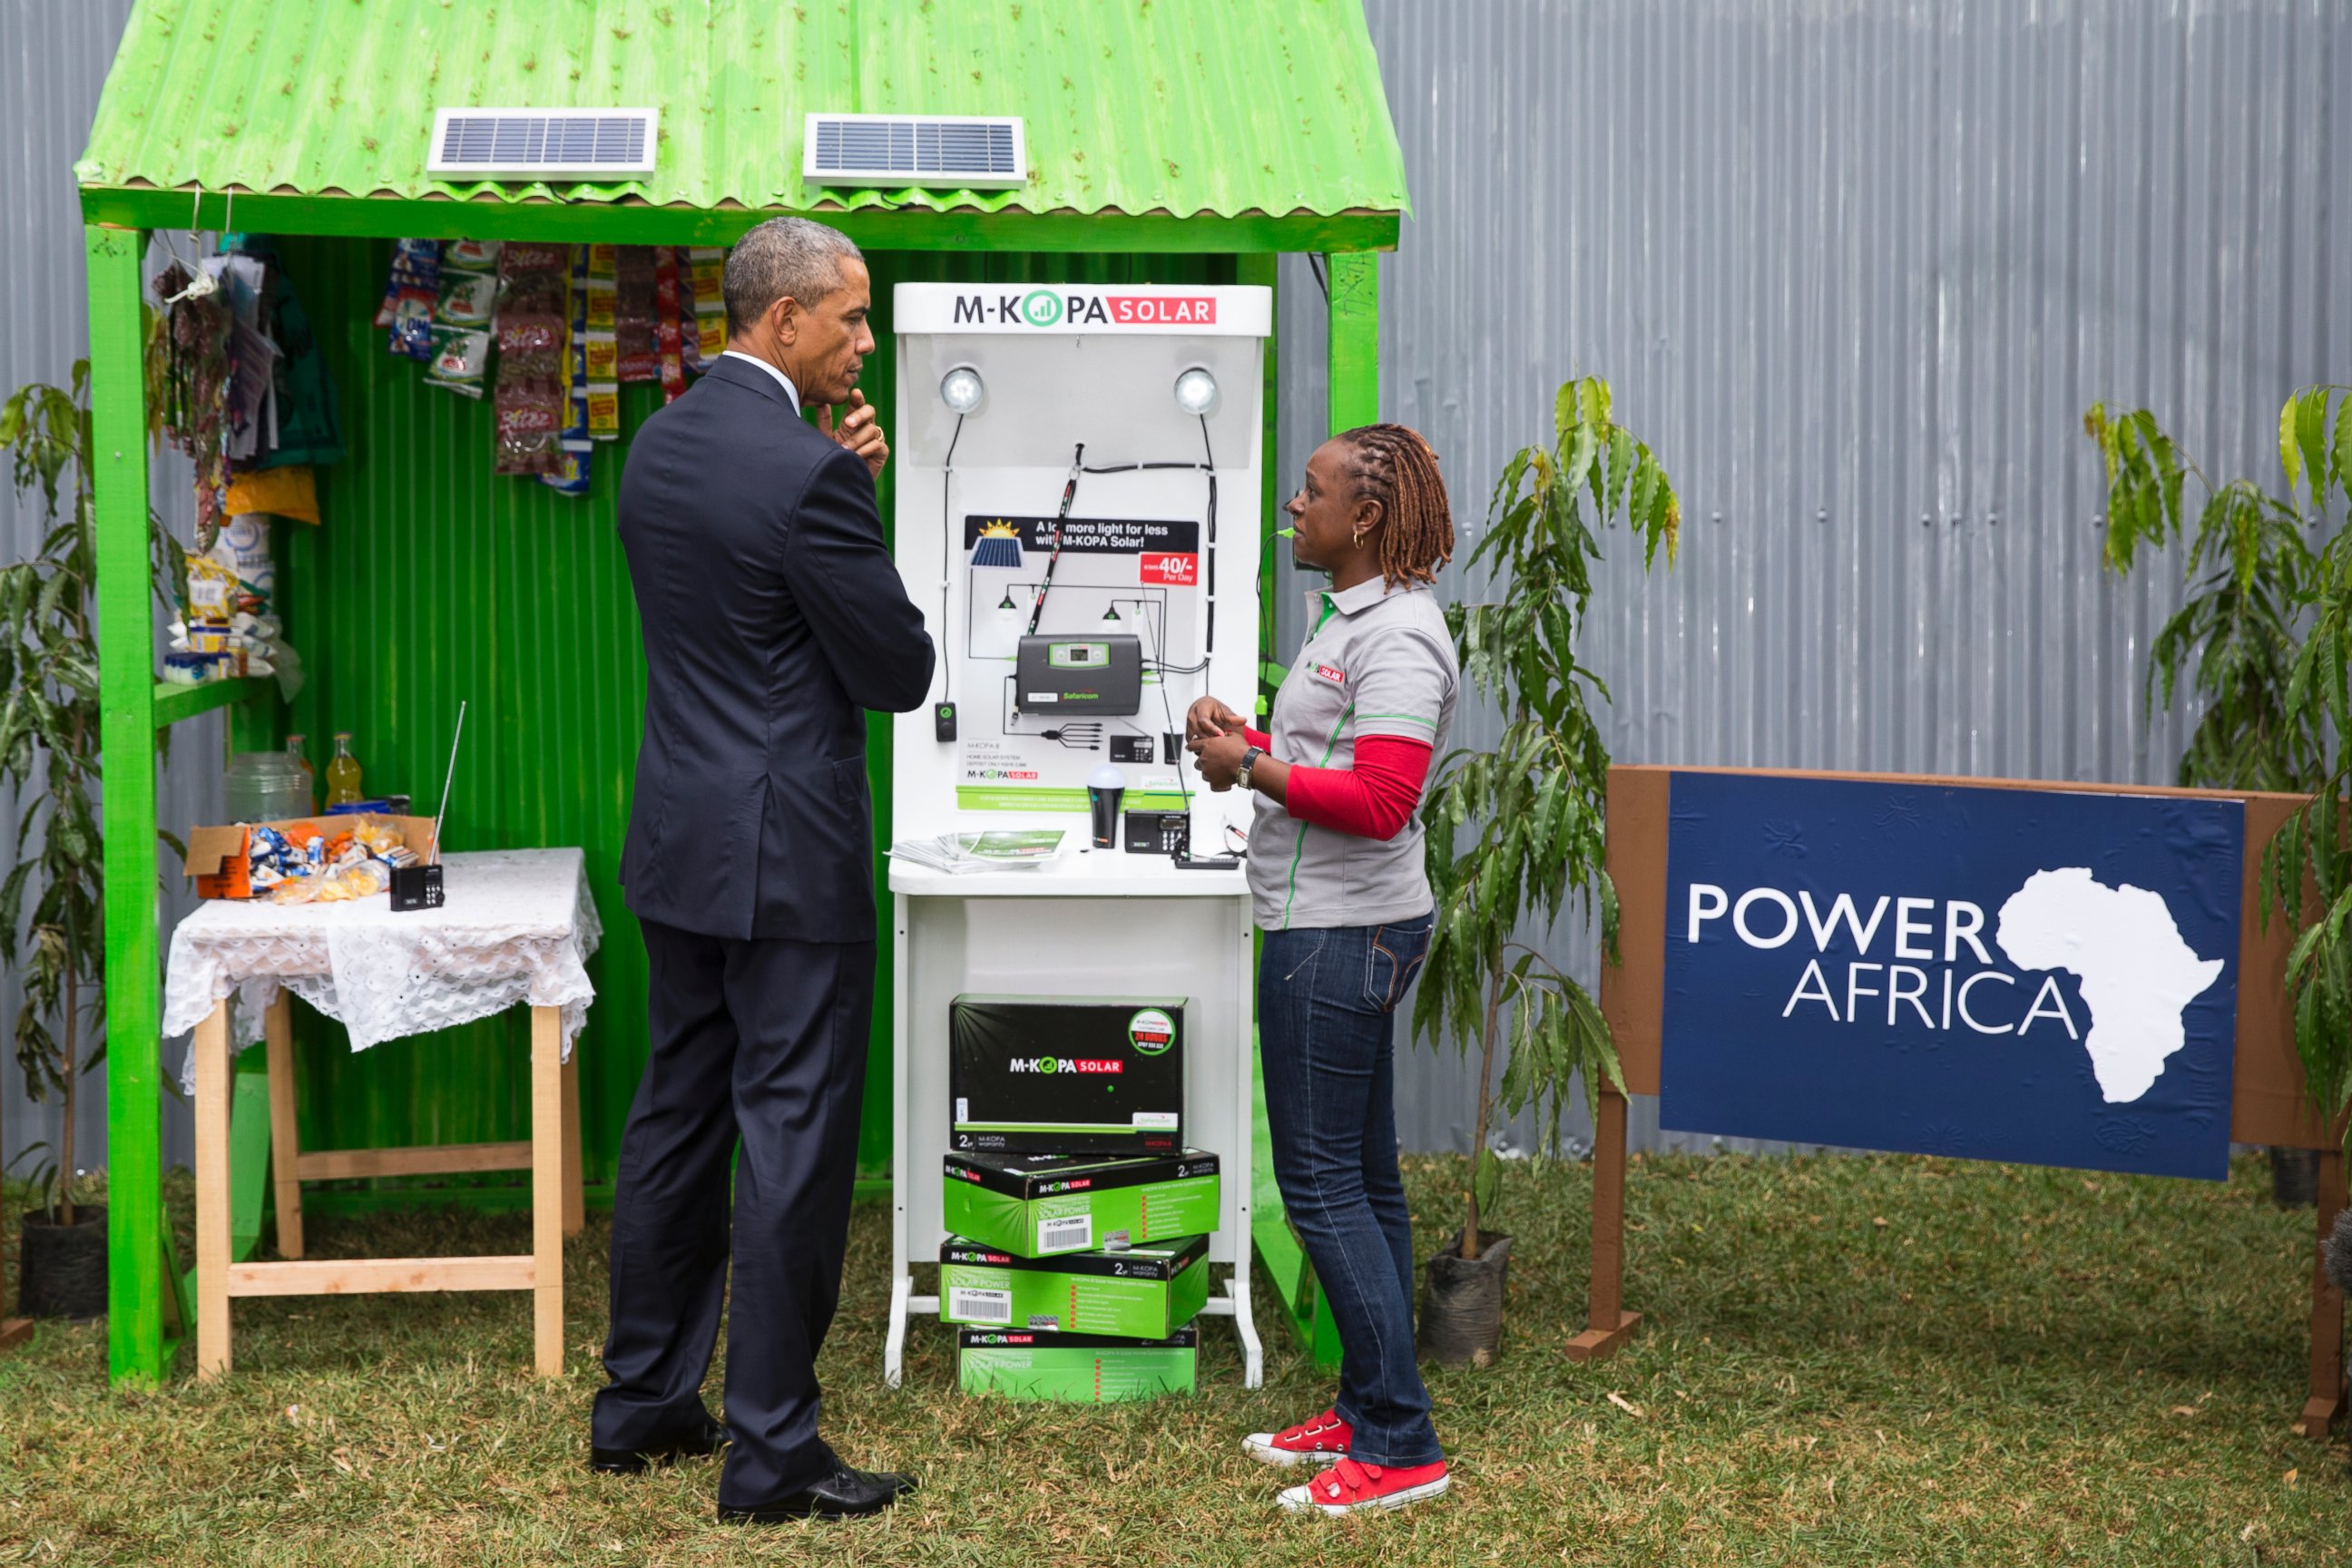 PHOTO: President Barack Obama looks at a solar power exhibit during a tour of the Power Africa Innovation Fair, Saturday, July 25, 2015, in Nairobi.